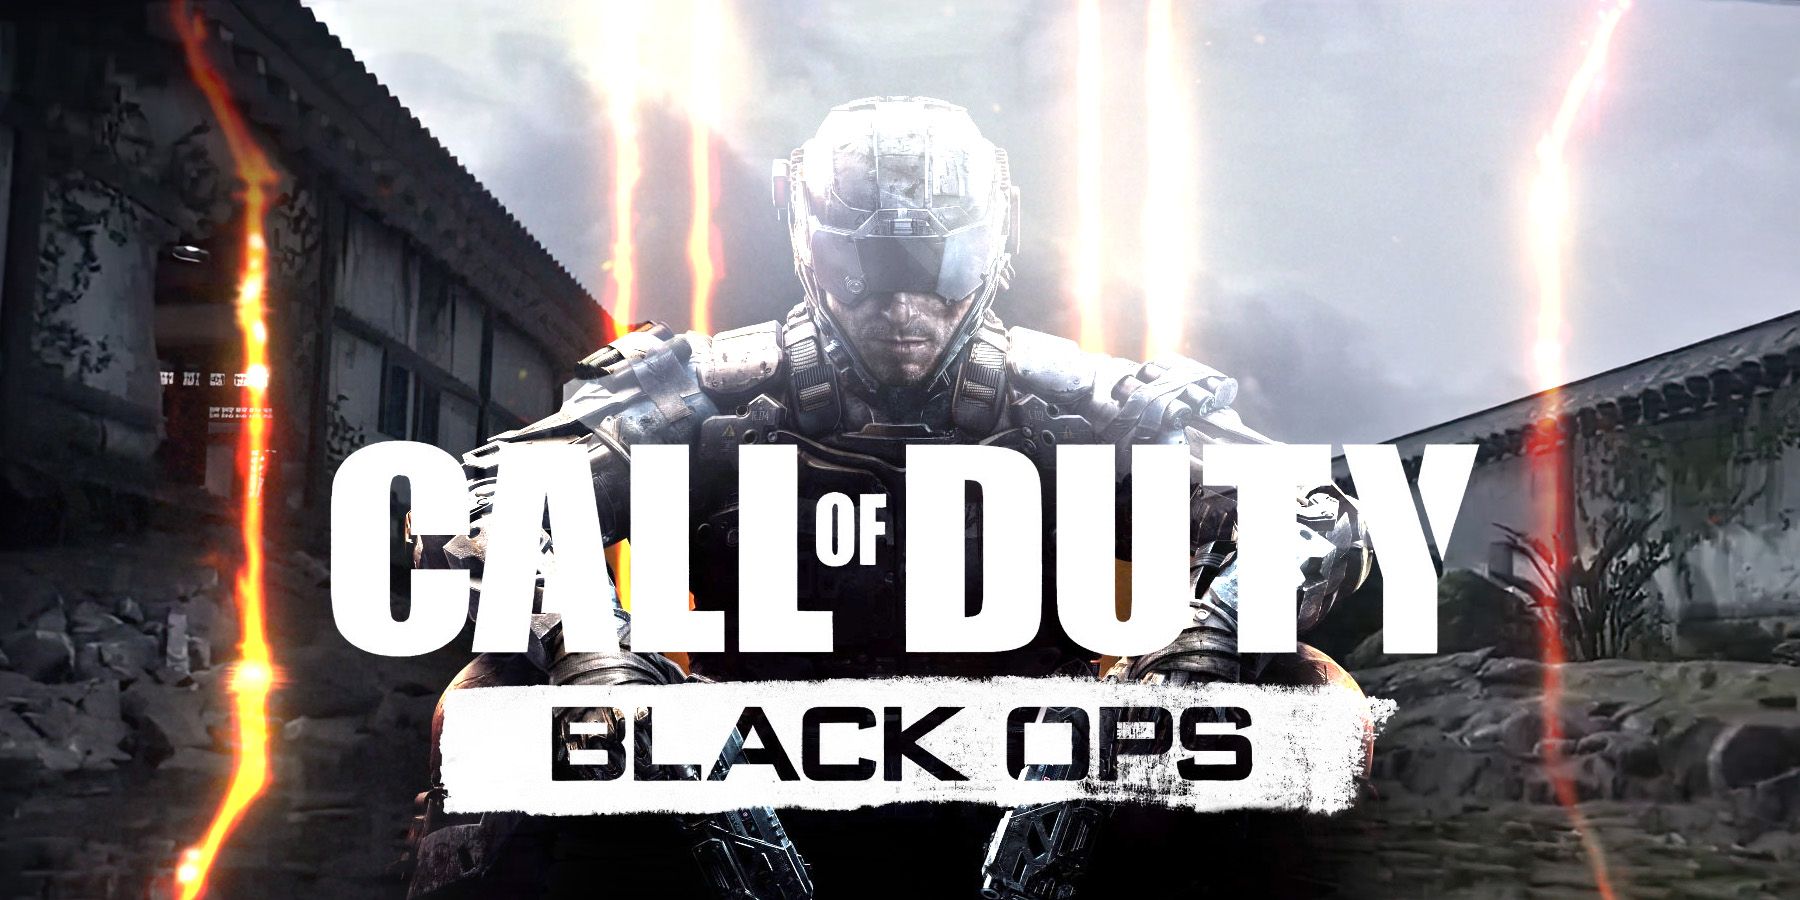 rumor-new-call-of-duty-warzone-2-map-may-hint-at-next-black-ops-game-4